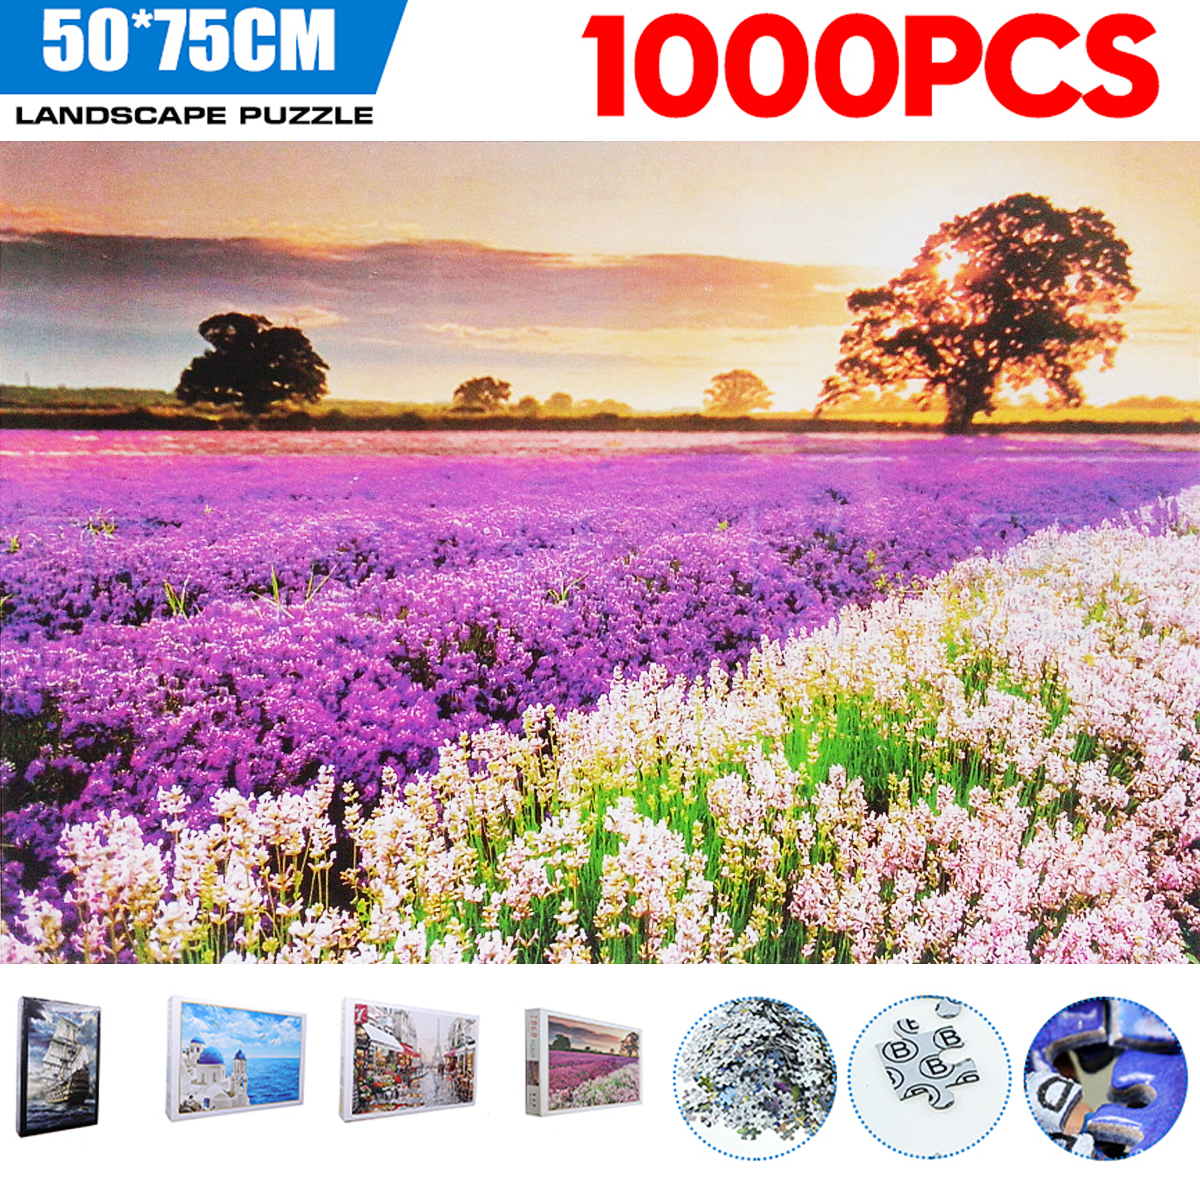 1000-Pieces-Jigsaw-Puzzle-Toy-DIY-Assembly-Paper-Puzzle-Beautiful-Building-Landscape-Educational-Toy-1685521-1